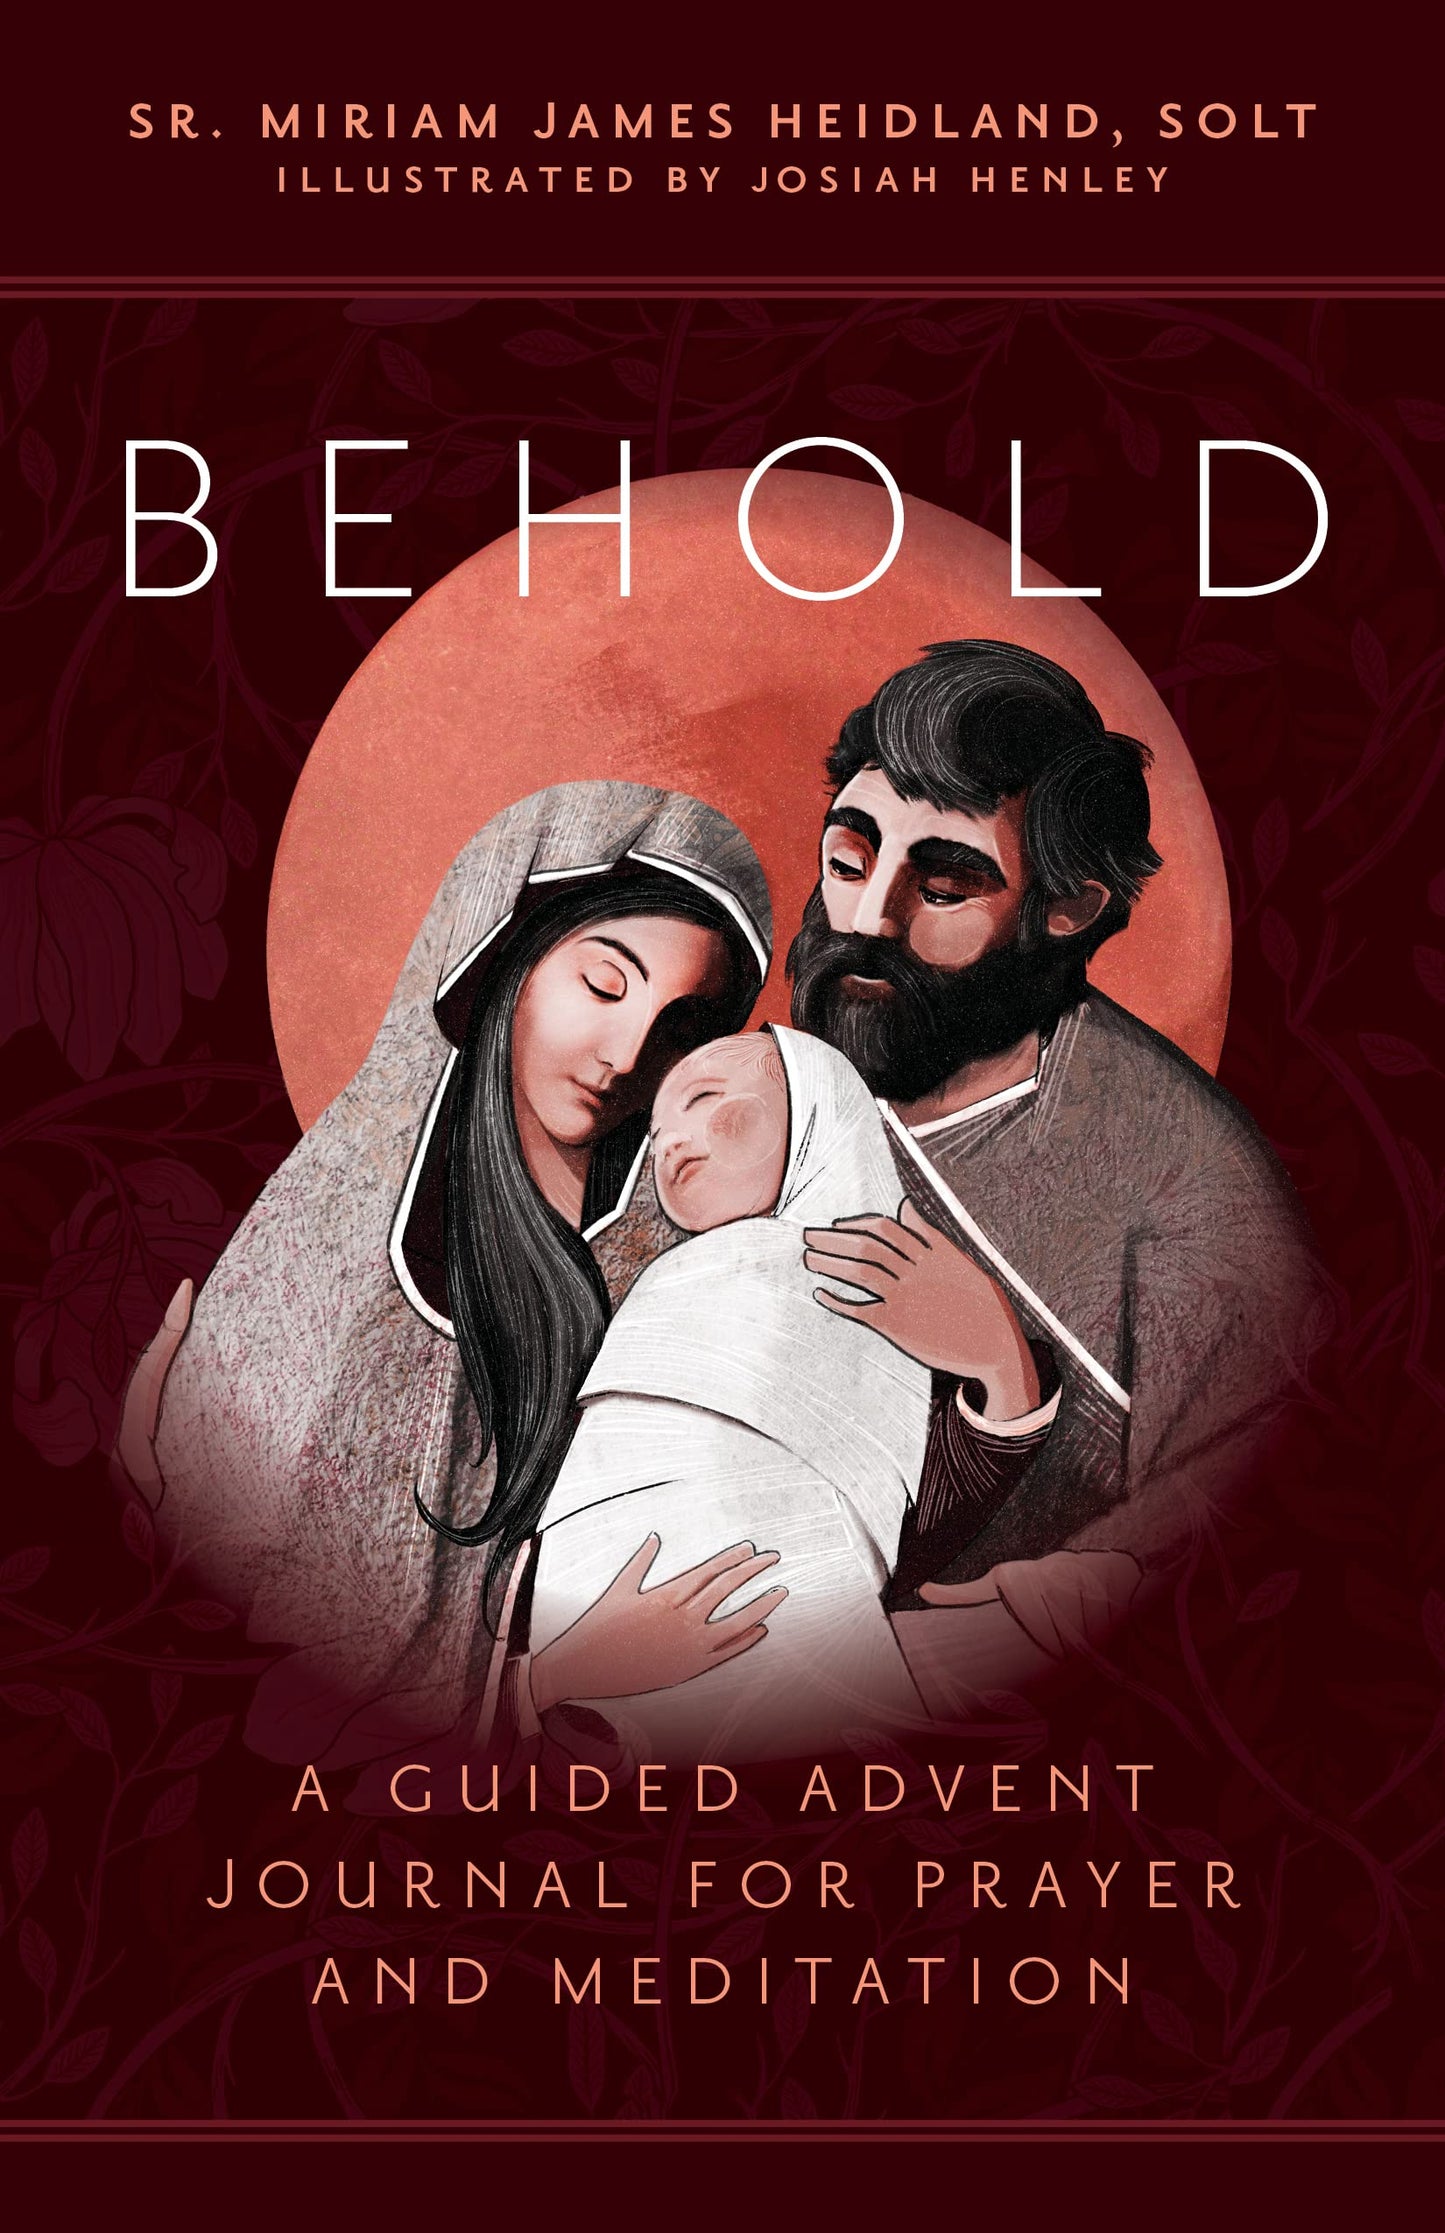 Behold A Guided Advent Journal for Prayer and Meditation